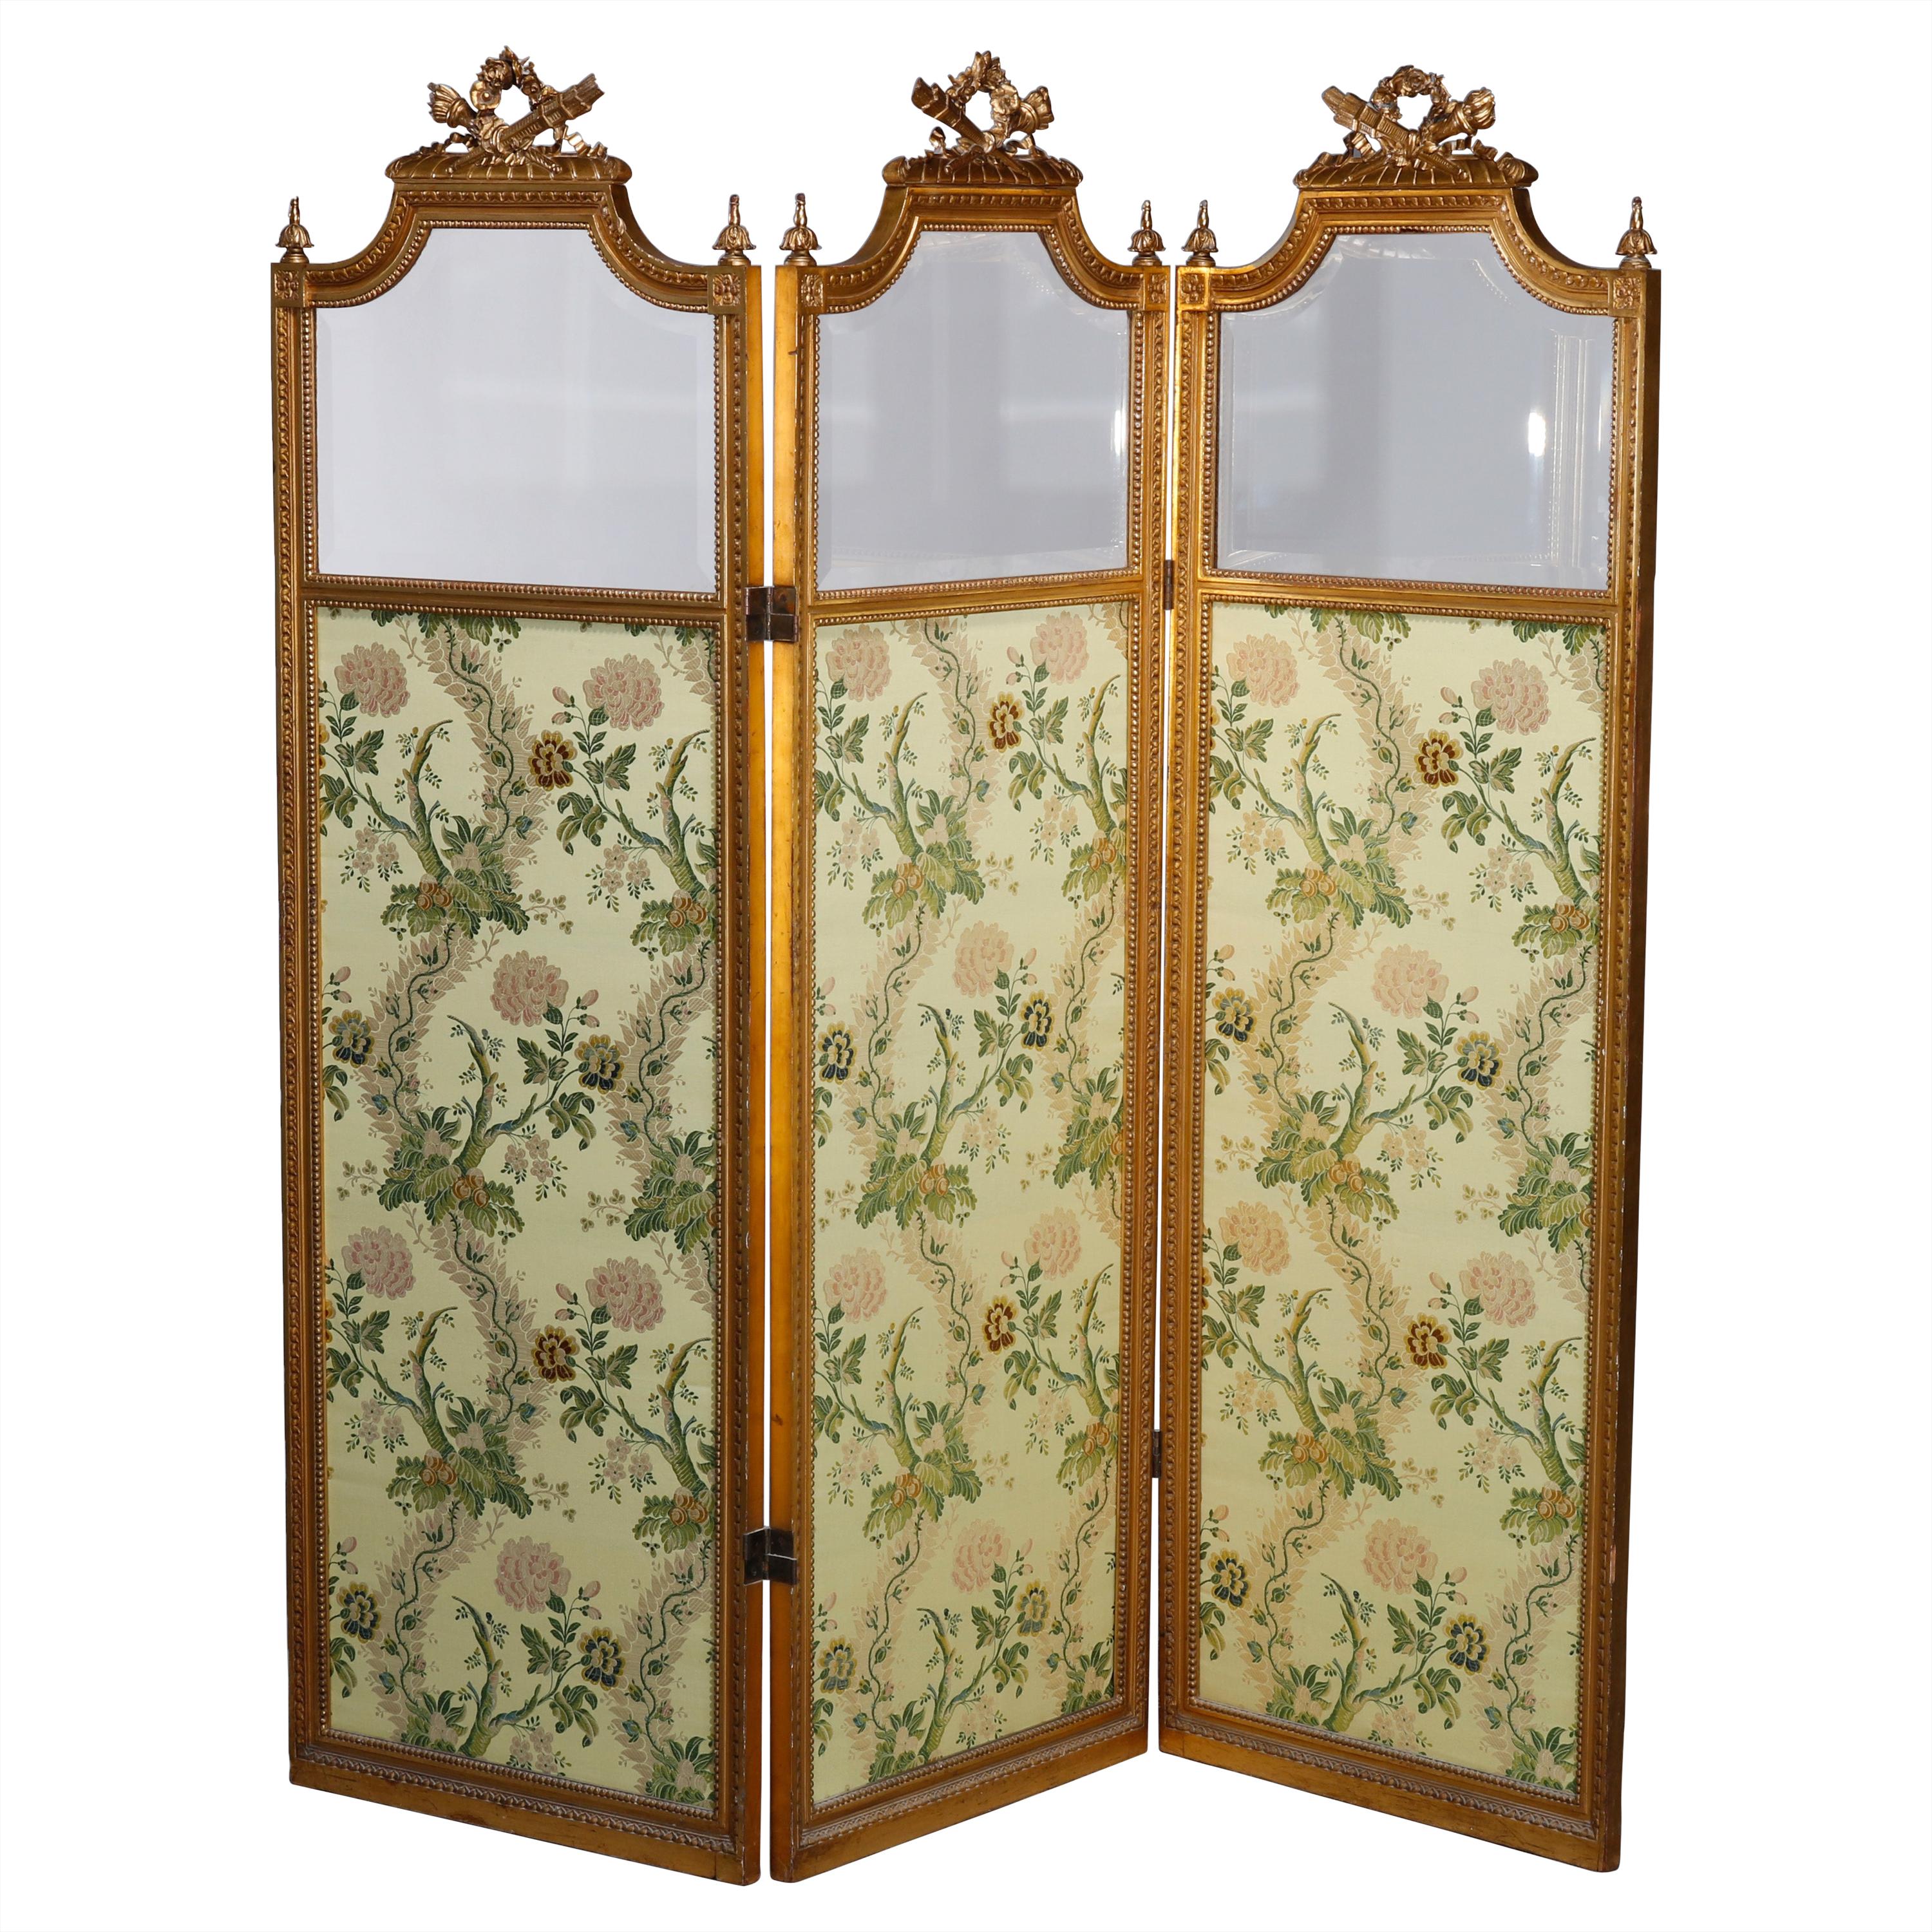 Antique French Empire Giltwood and Beveled Glass 3-Panel Dressing Screen  19th C at 1stDibs | dressing screen vintage, victorian dressing screen,  antique dressing screen